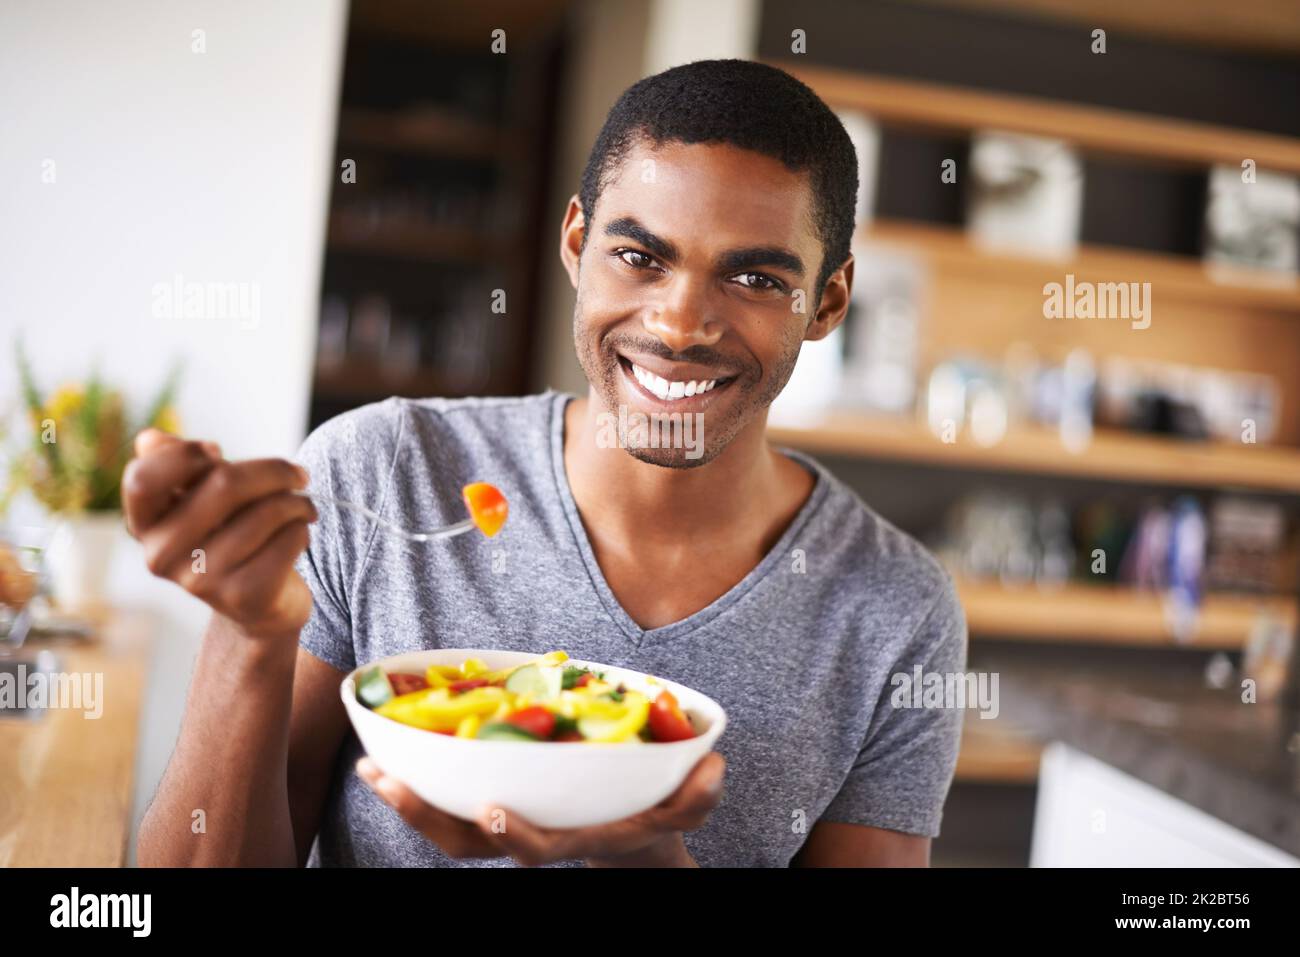 Have a bite of health. Indoor shot of a gorgeous young black man showing off his fruit salad. Stock Photo